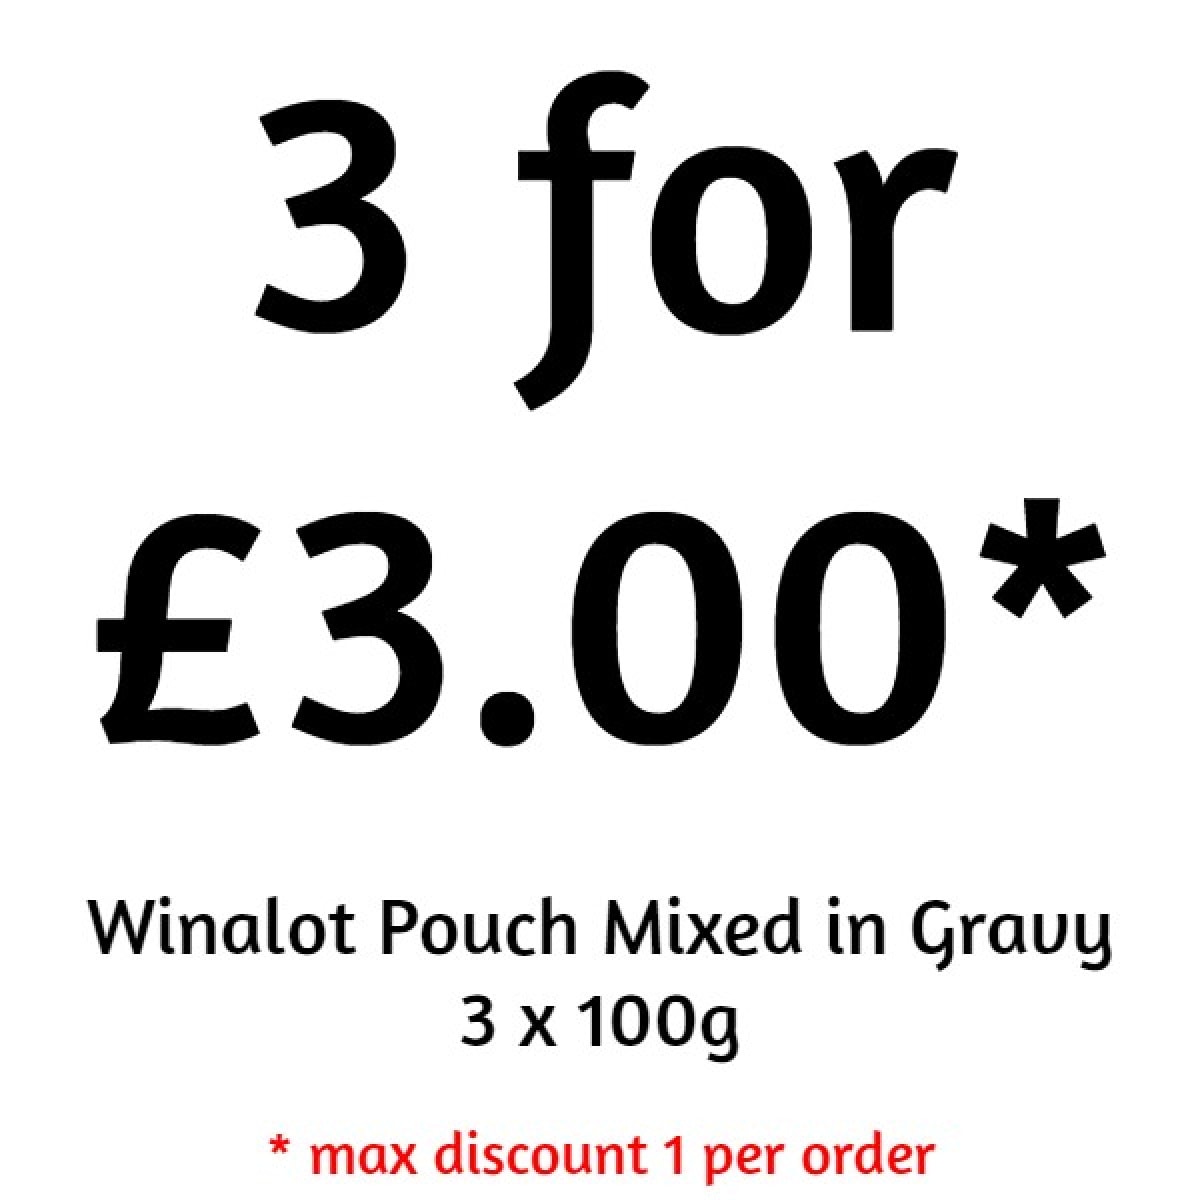 Winalot – Pouch Mixed in Gravy 3 x 100g – Pawfect Supplies Ltd Product Image